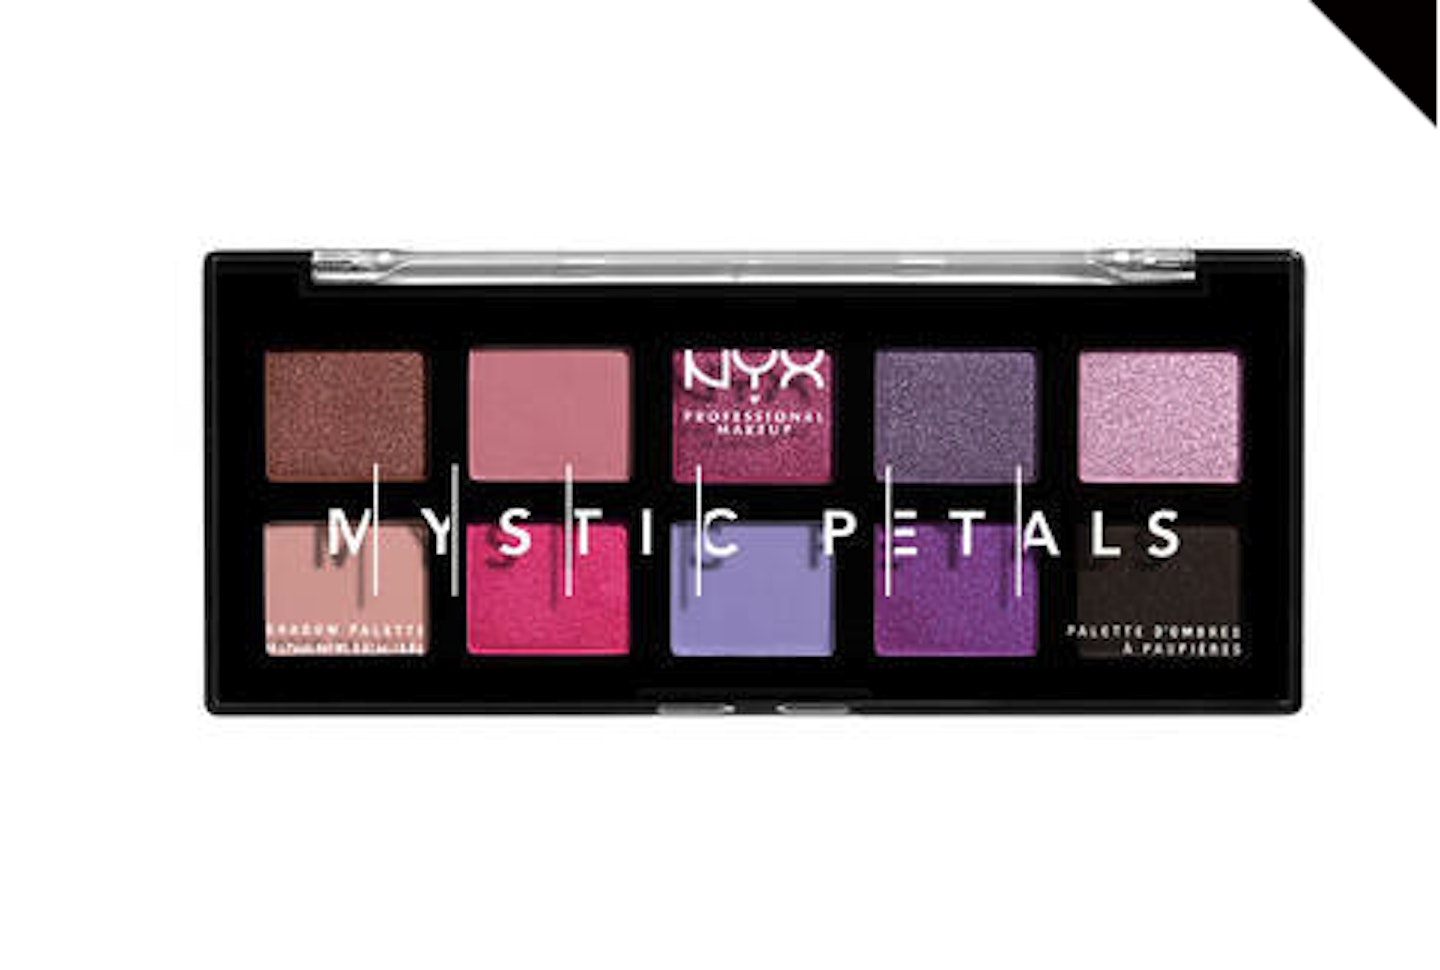 NYX Mystic Petals Shadow Palette, Midnight Orchid, £11.00